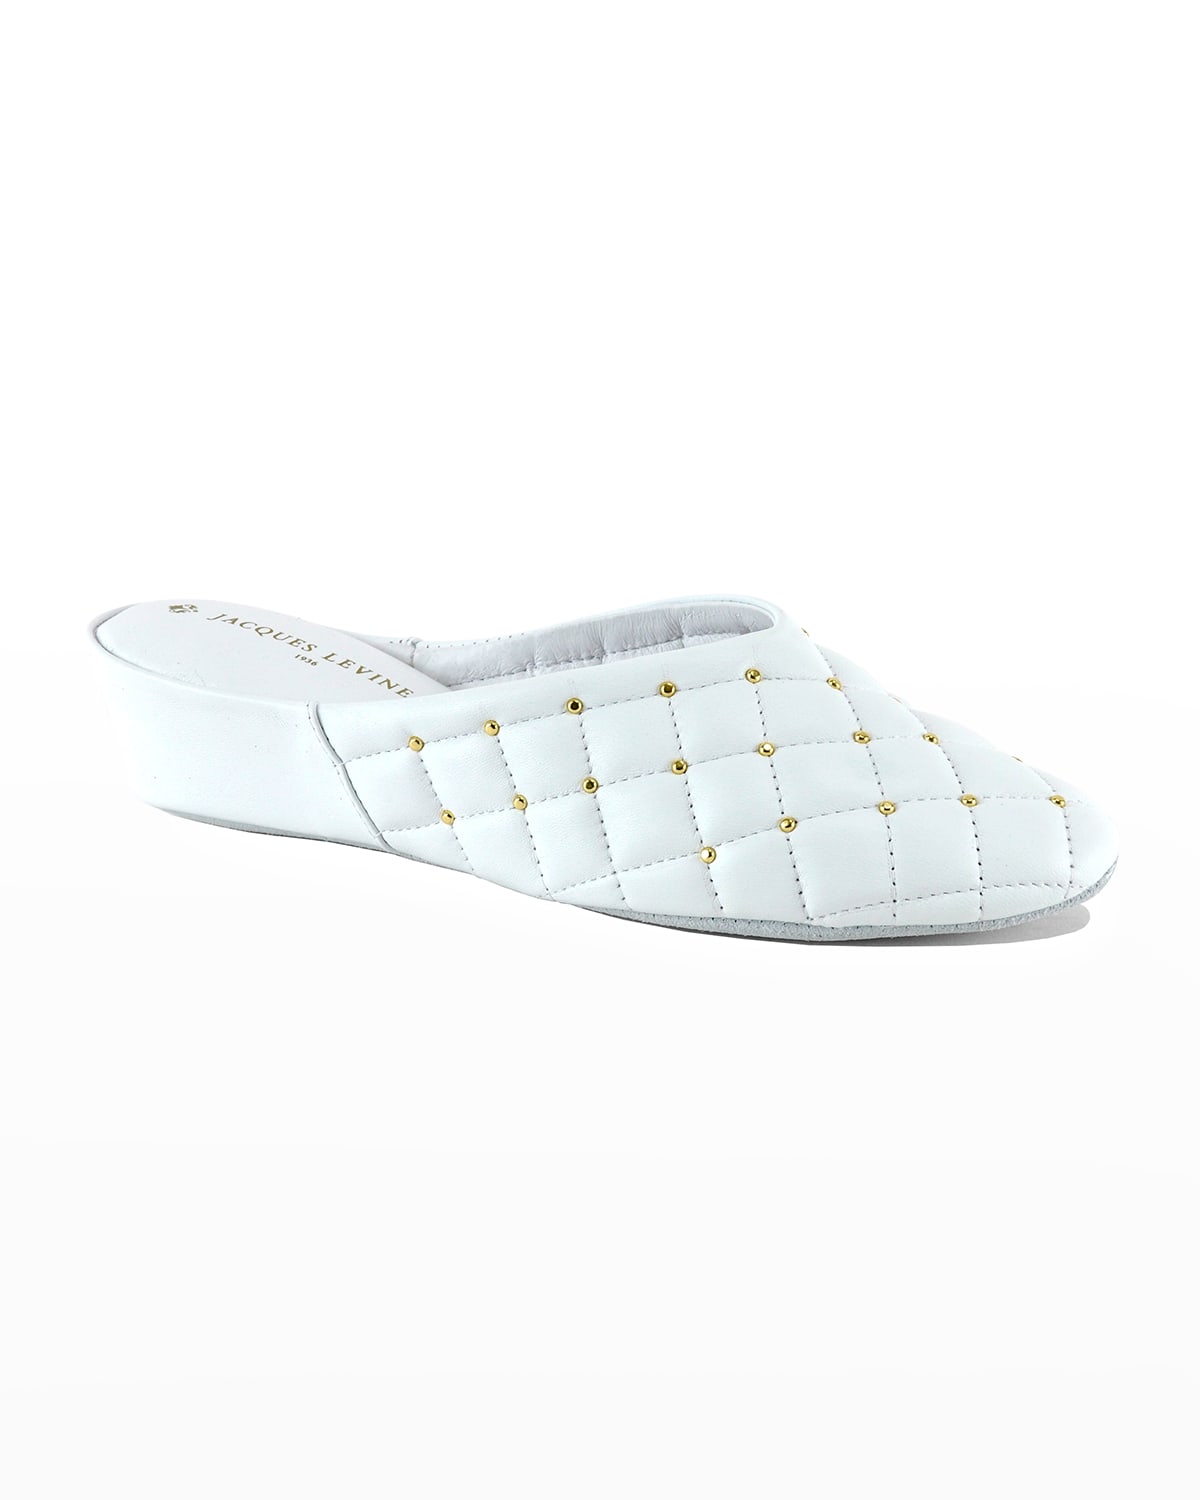 Jacques Levine Quilted Leather Studded Slippers